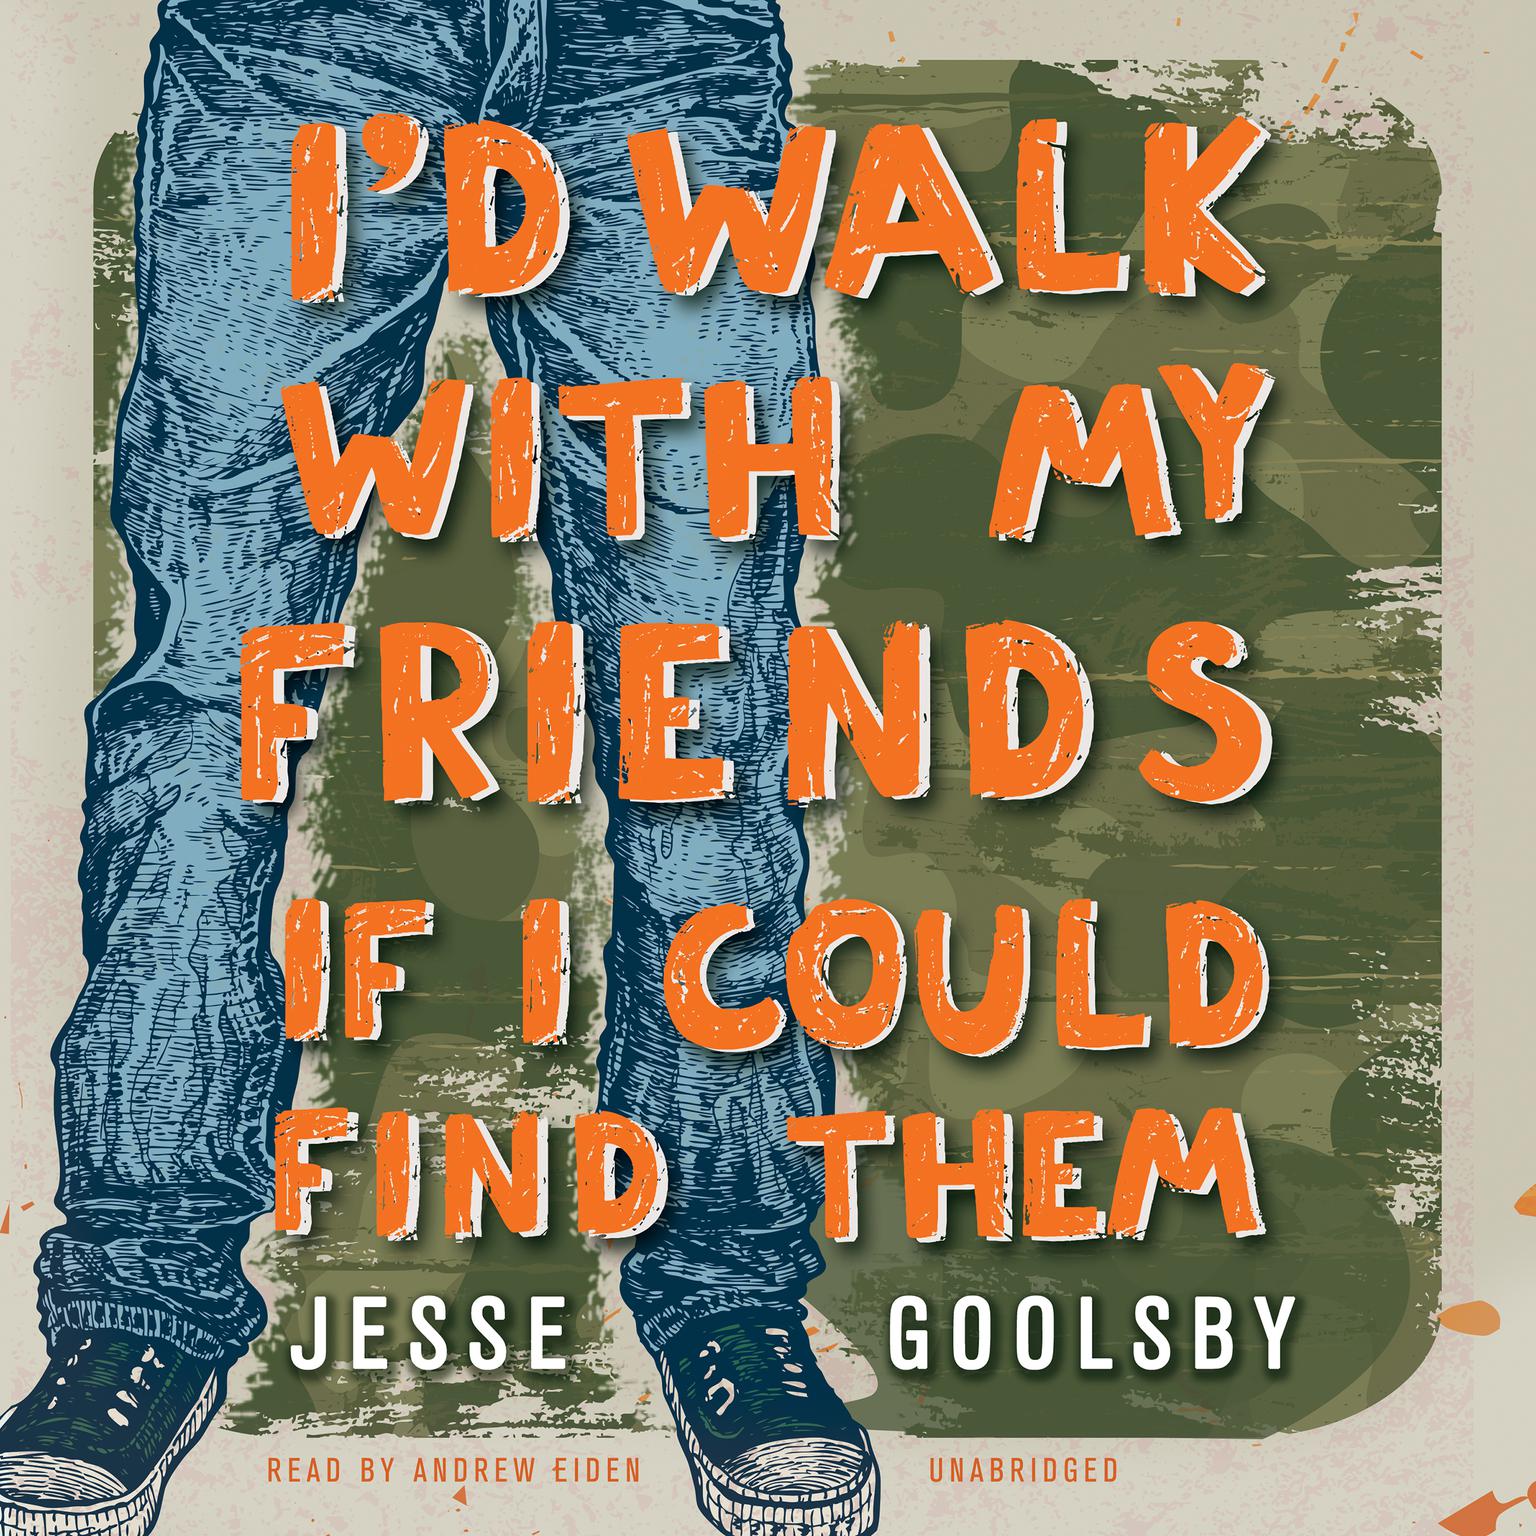 I’d Walk with My Friends If I Could Find Them Audiobook, by Jesse Goolsby